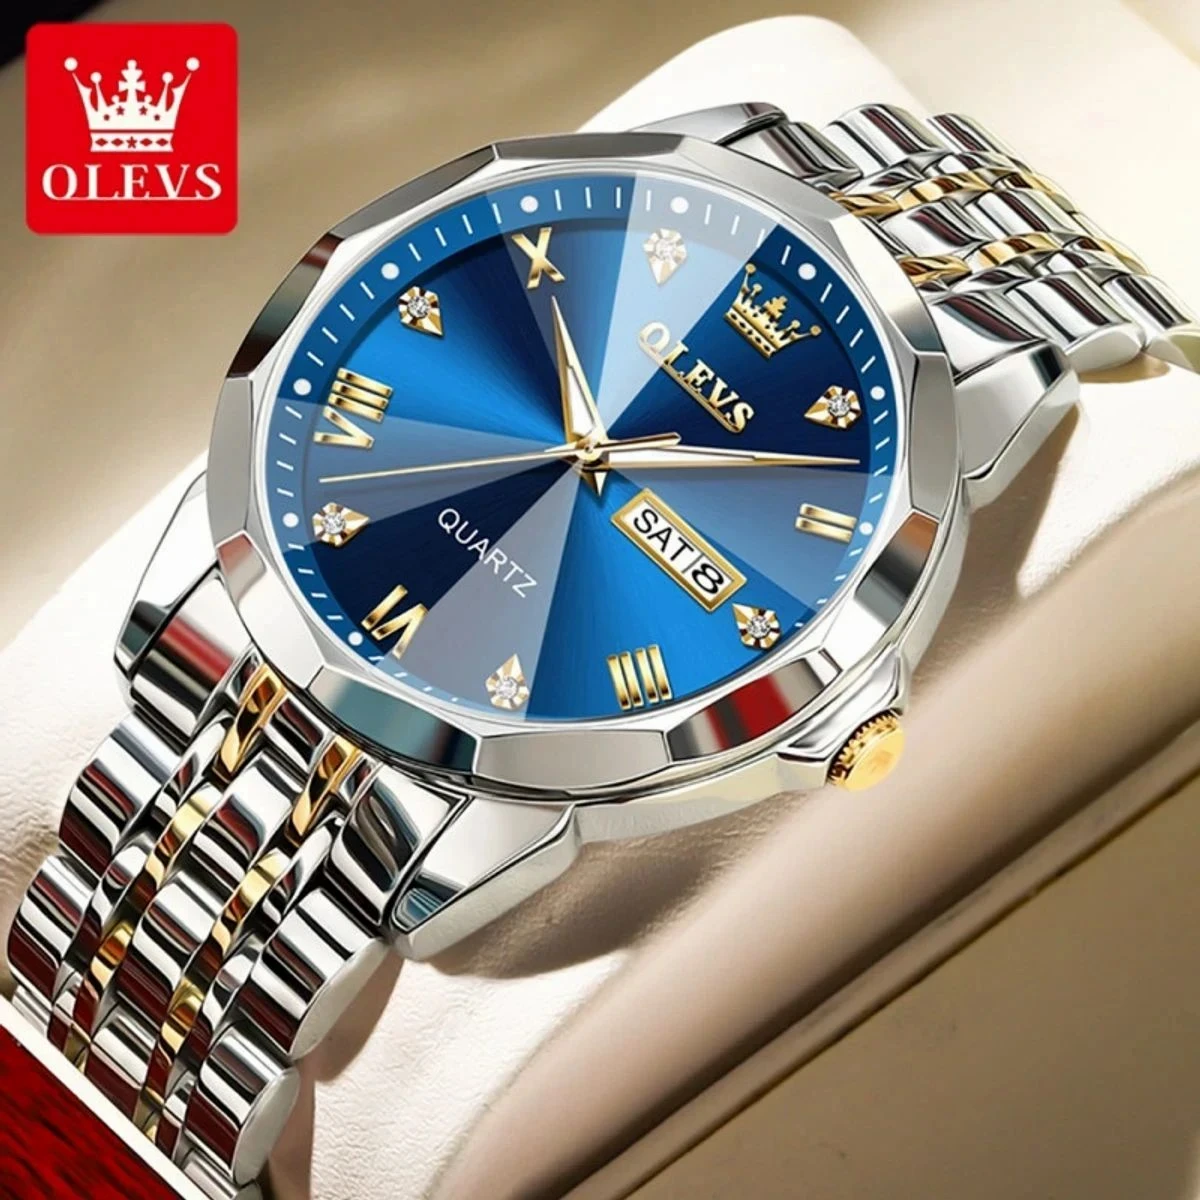 OLEVS MODEL 9931 Watch for Men Stainless Steel Watches - 9941 TOTON AR DIAL BLUE - MAN WATCH LOCK PUSH